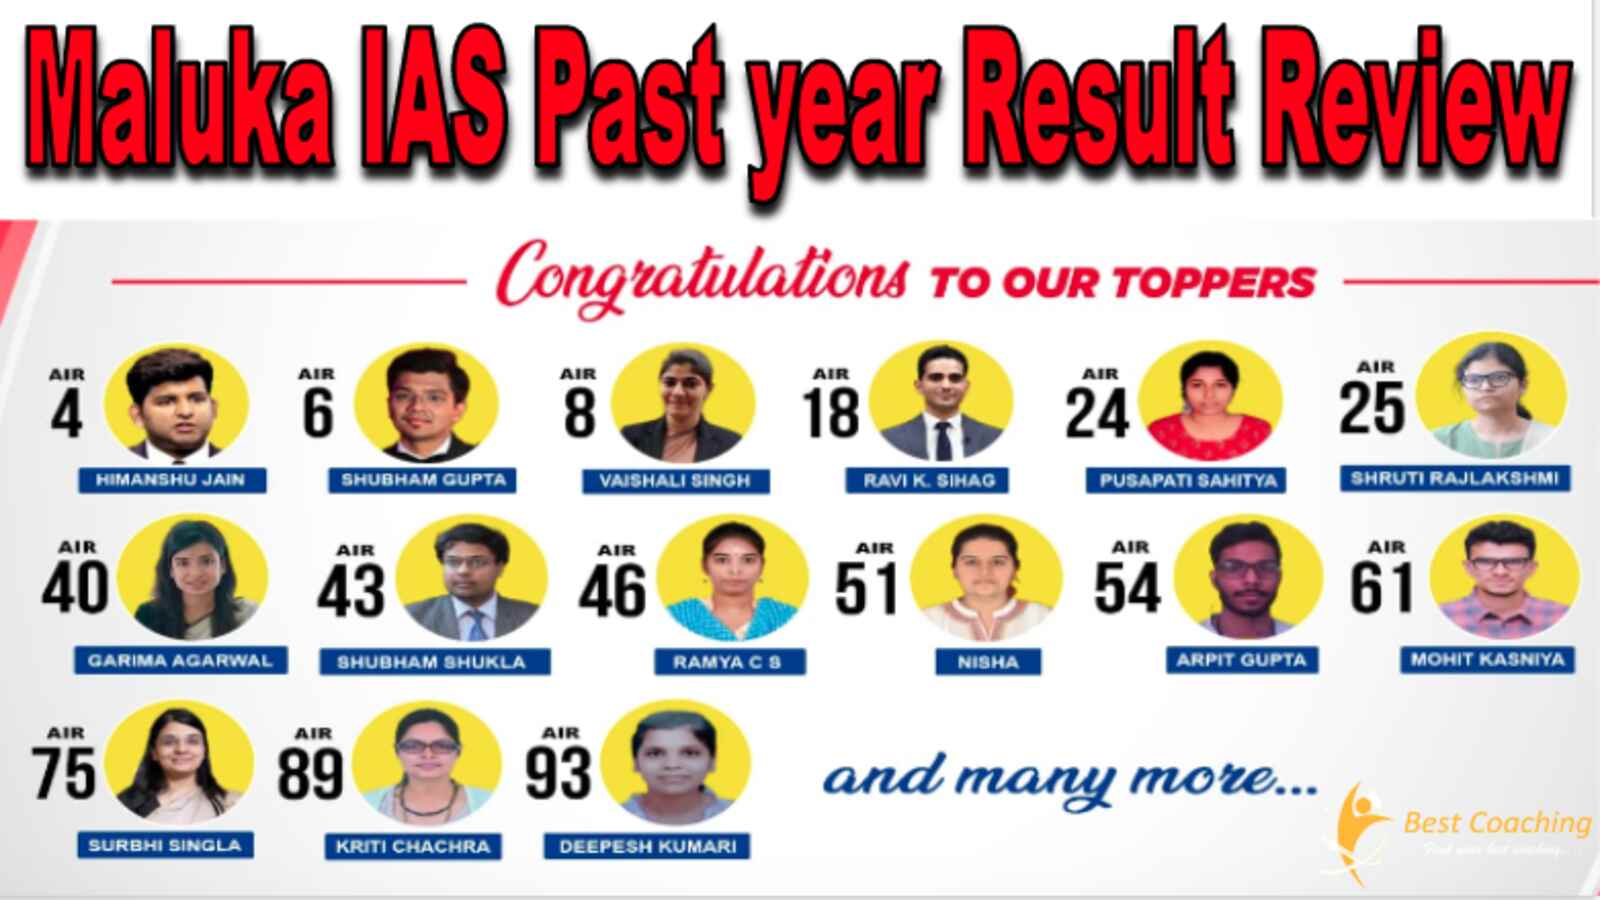 Maluka IAS past year Result Review